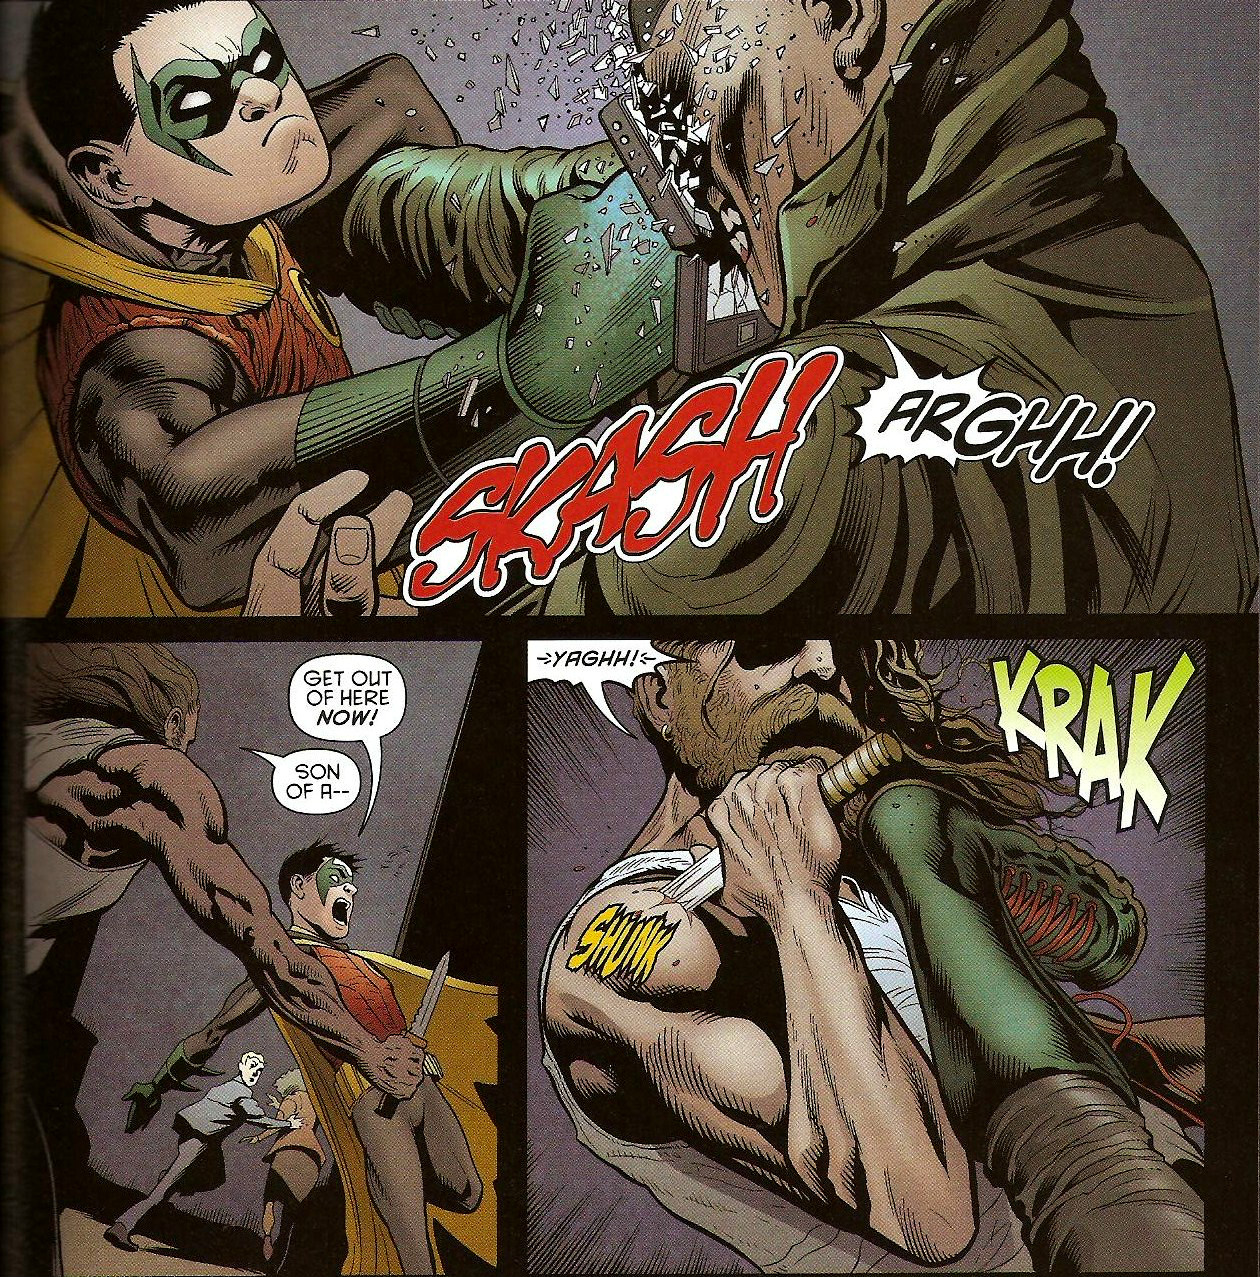 From Batman and Robin (Vol. 2) #3 (2012)